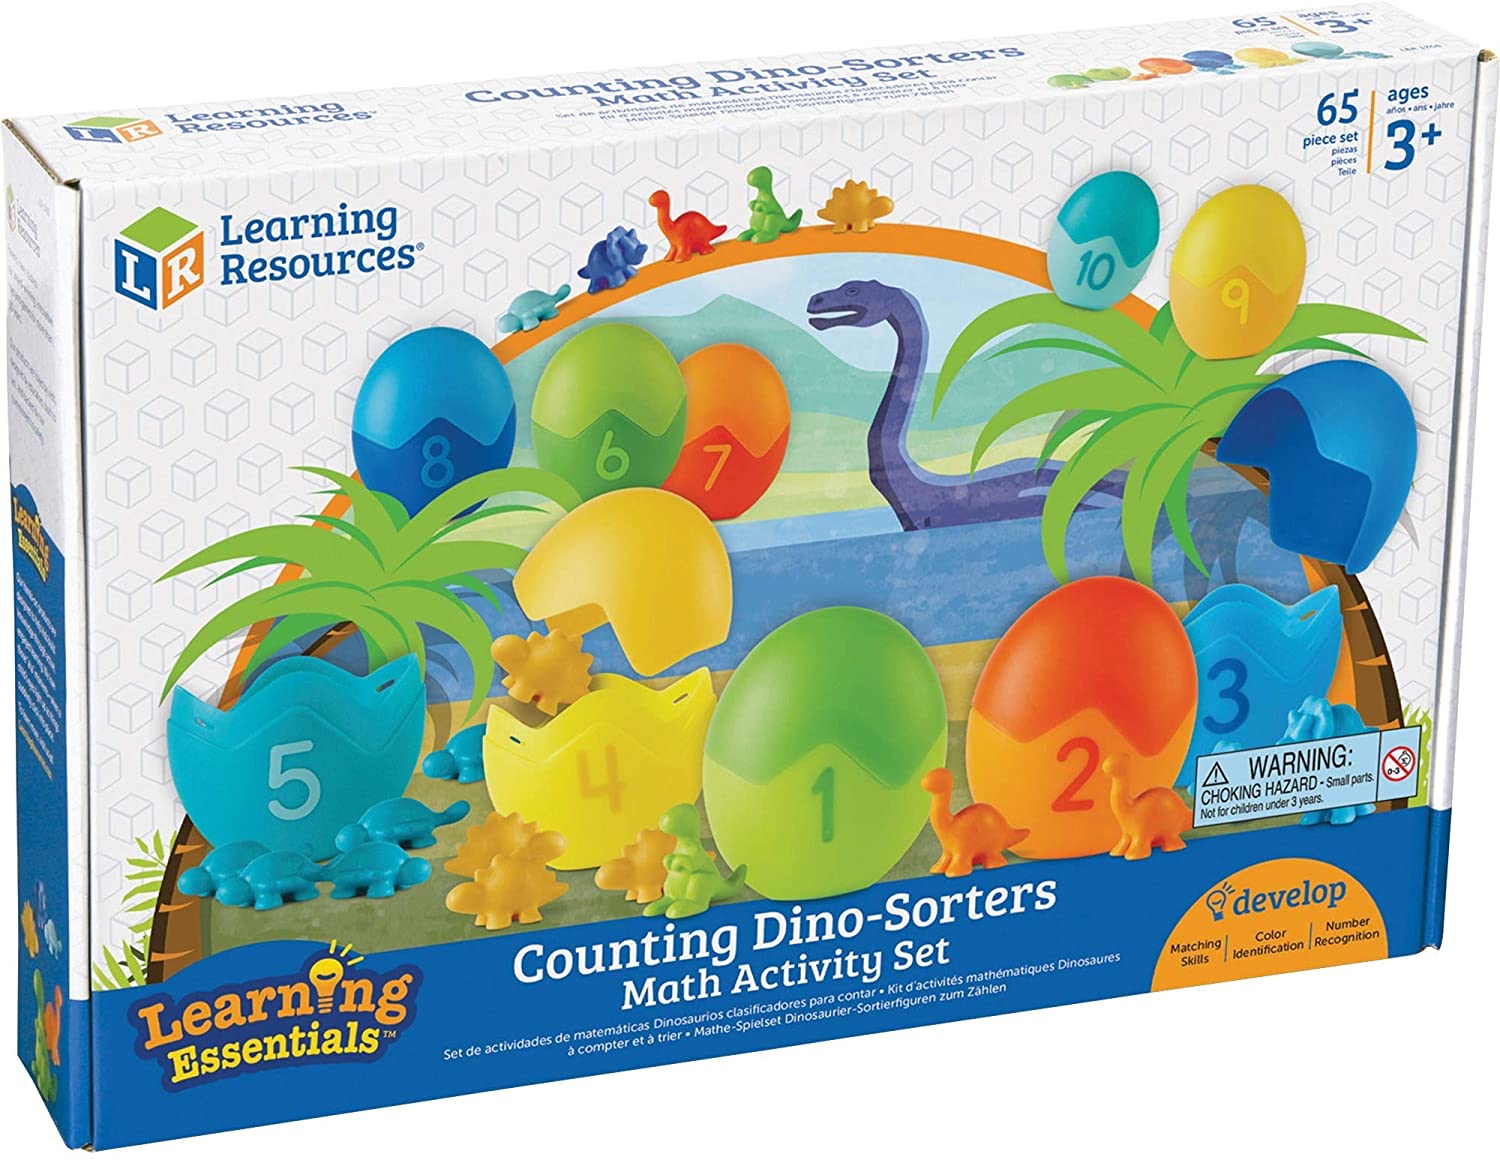 Counting Dinos Sorters